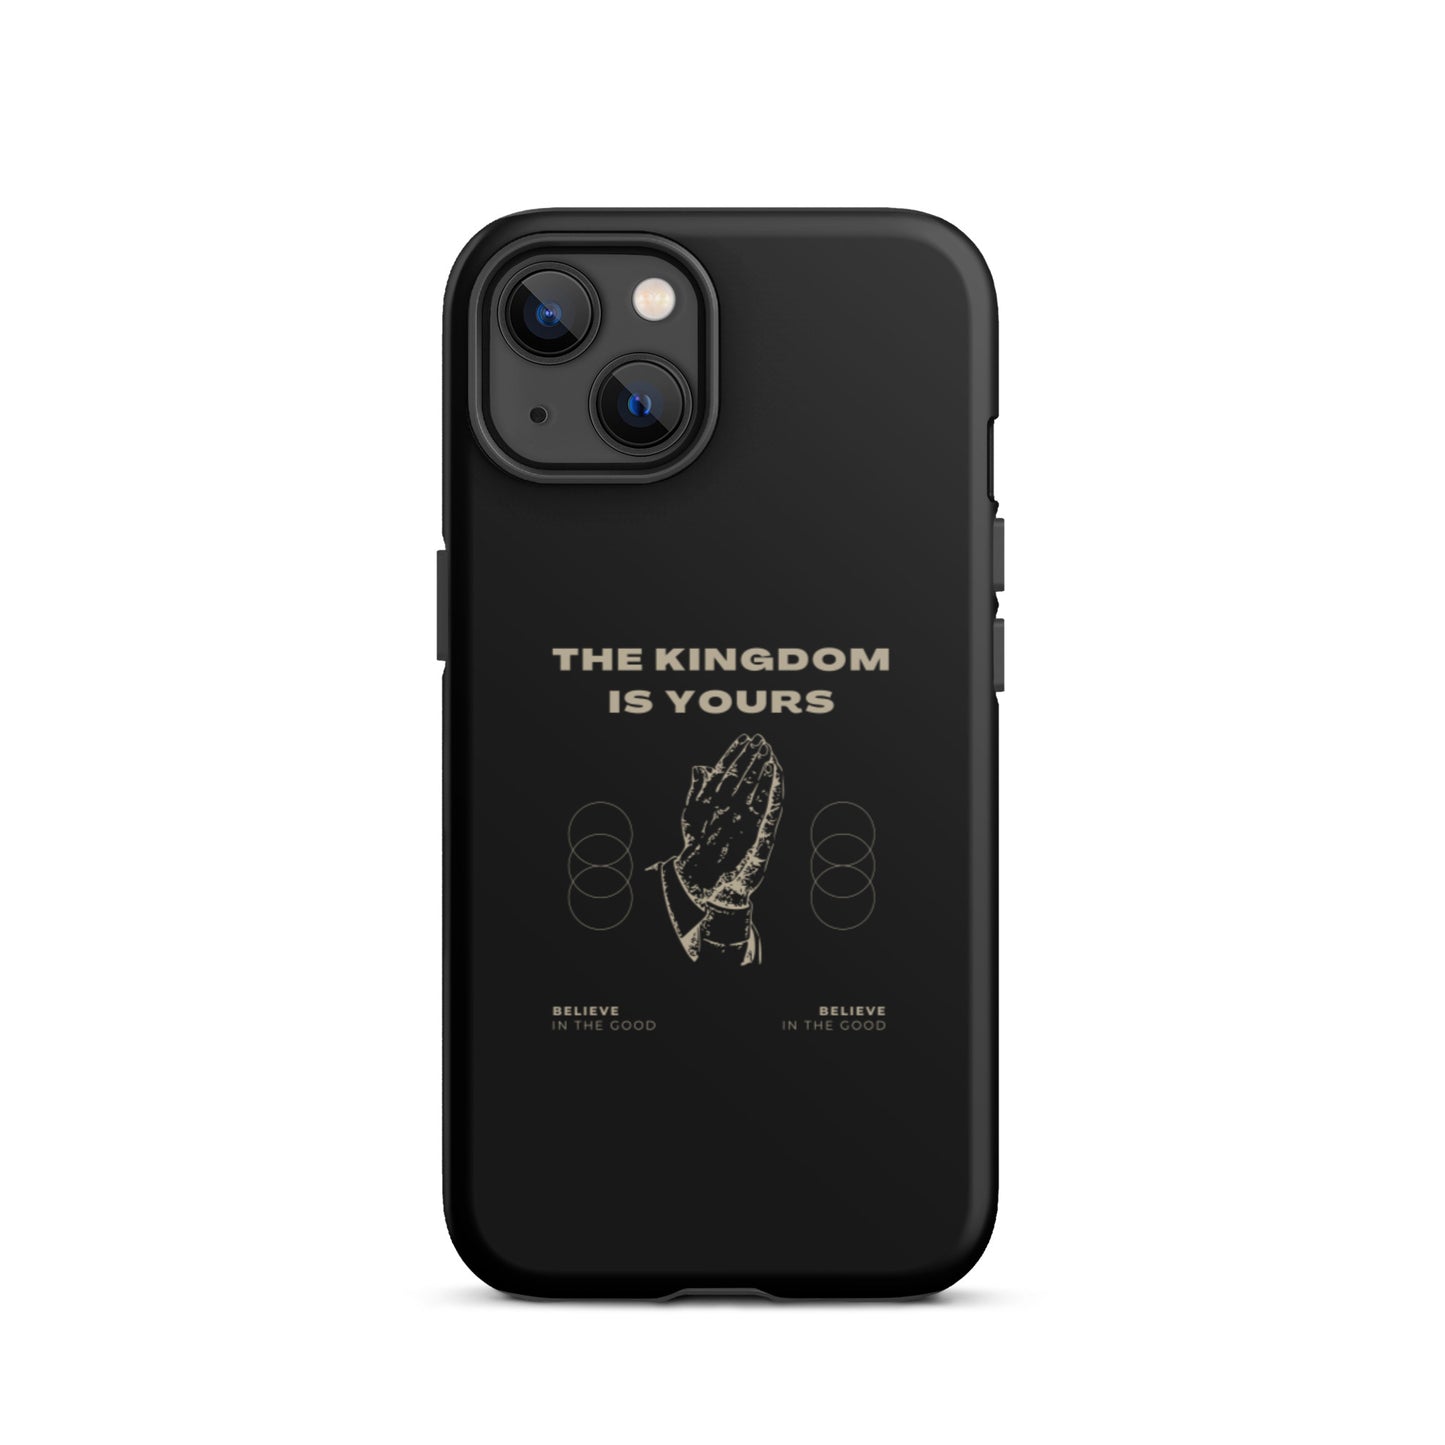 The Kingdom Is Yours - Tough iPhone case